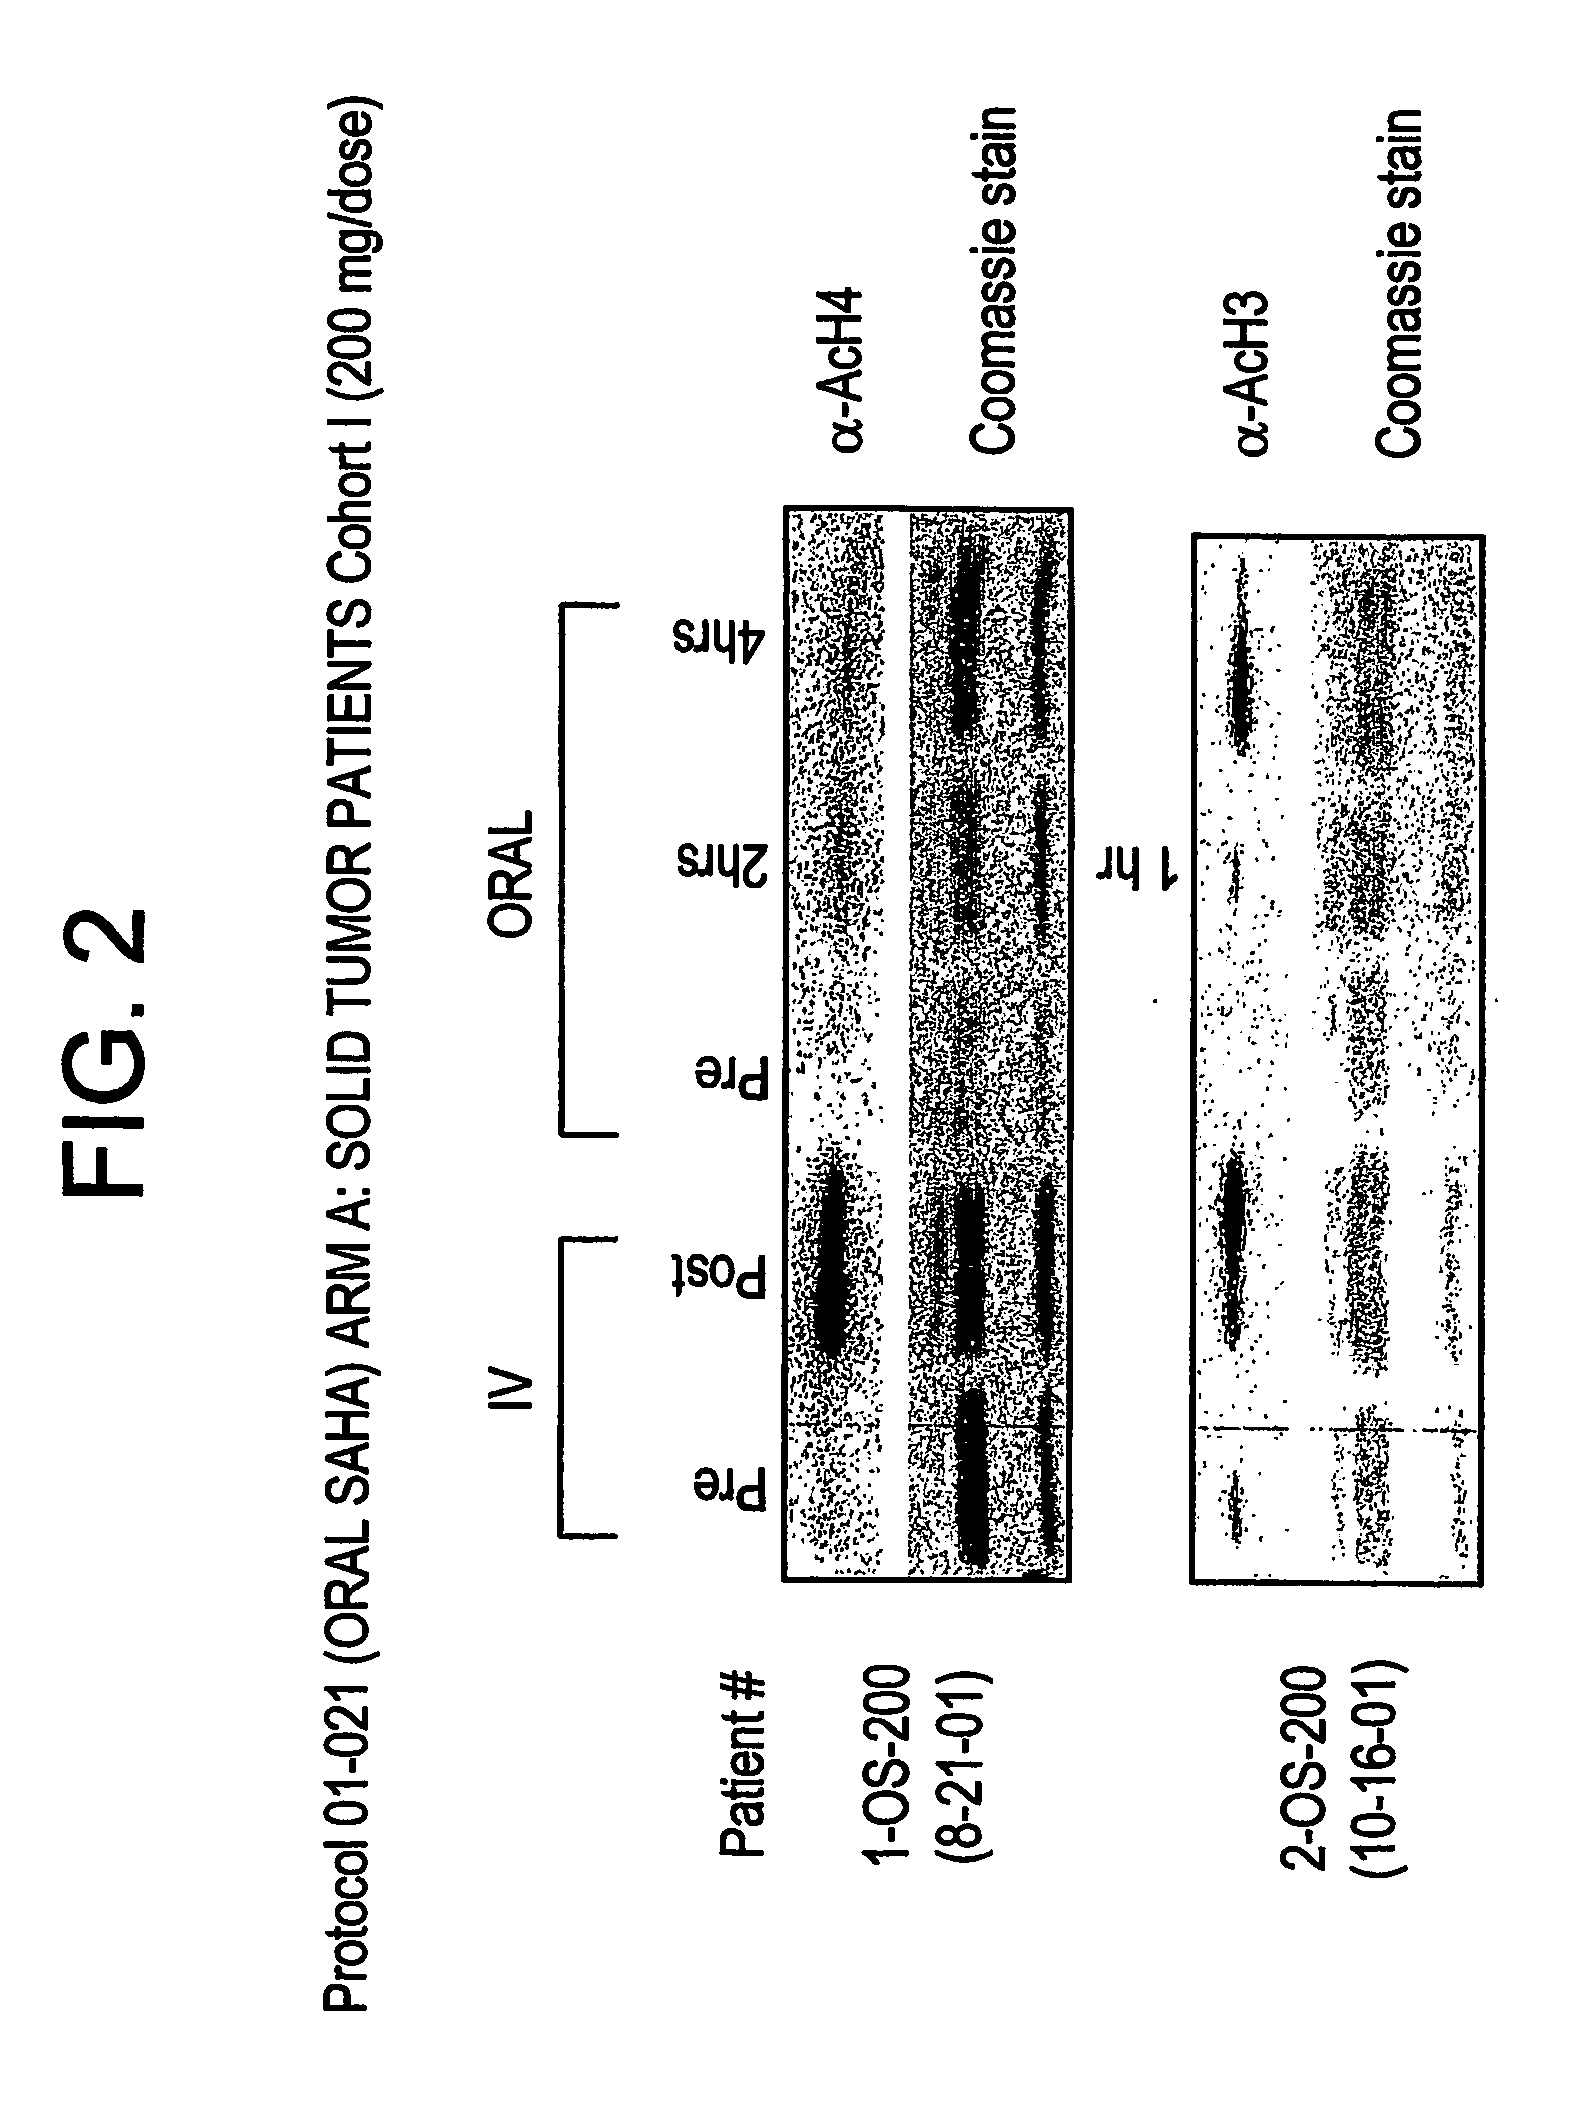 Methods of treating cancer with hdac inhibitors